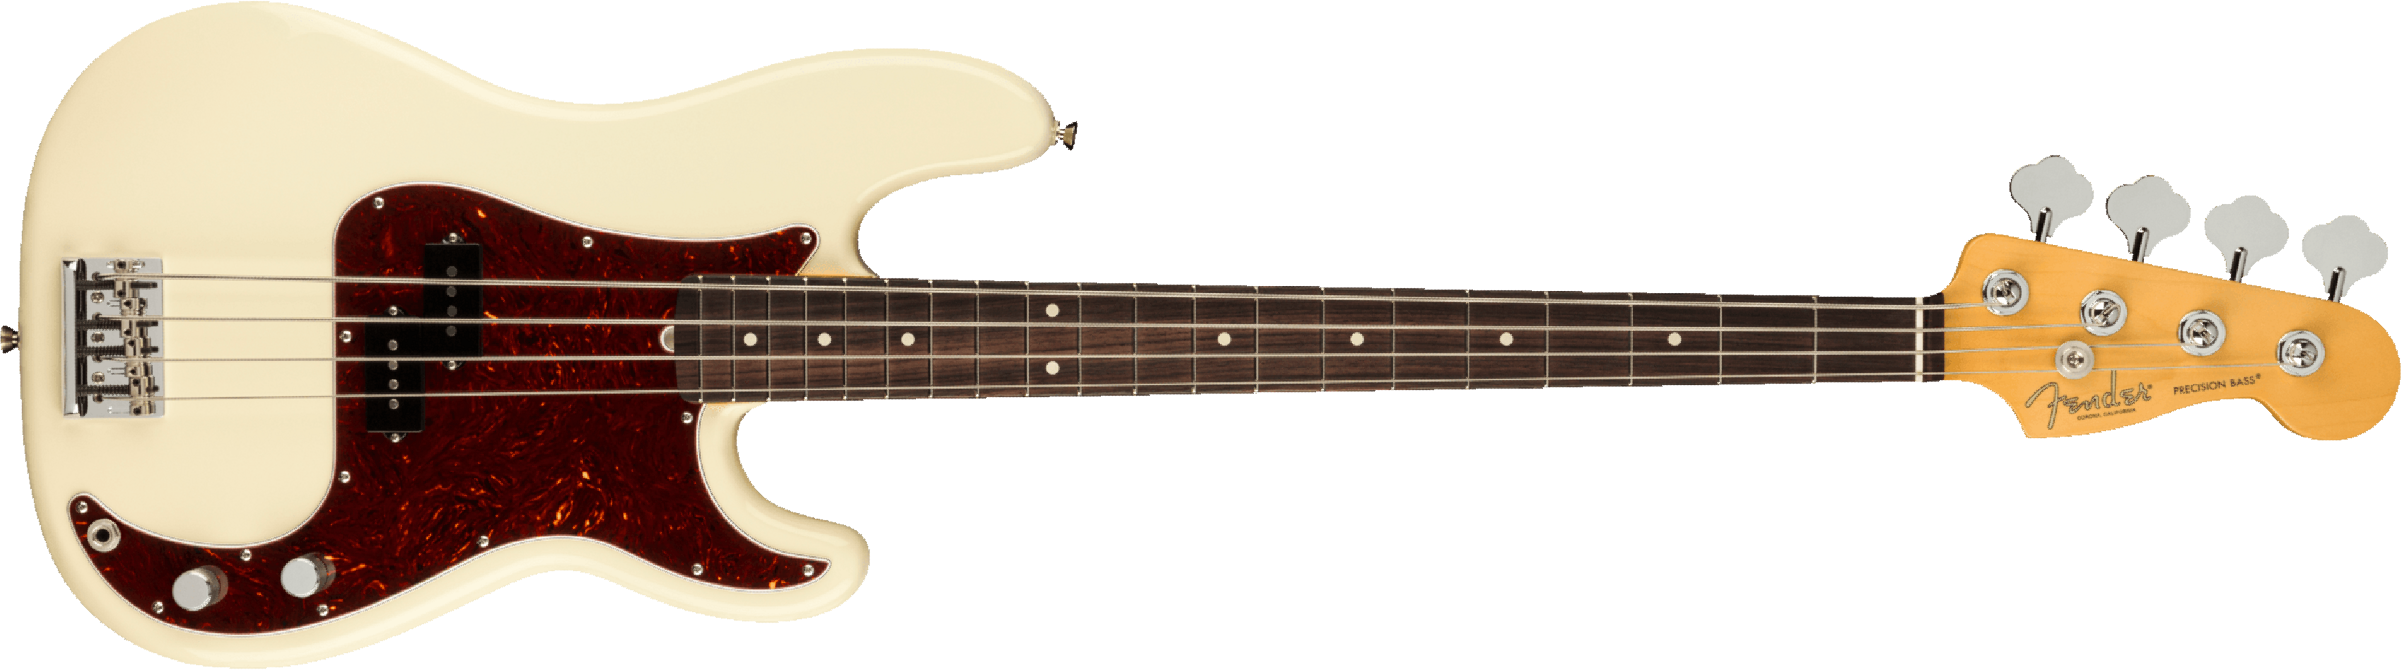 Fender Precision Bass American Professional Ii Usa Rw - Olympic White - Solid body elektrische bas - Main picture